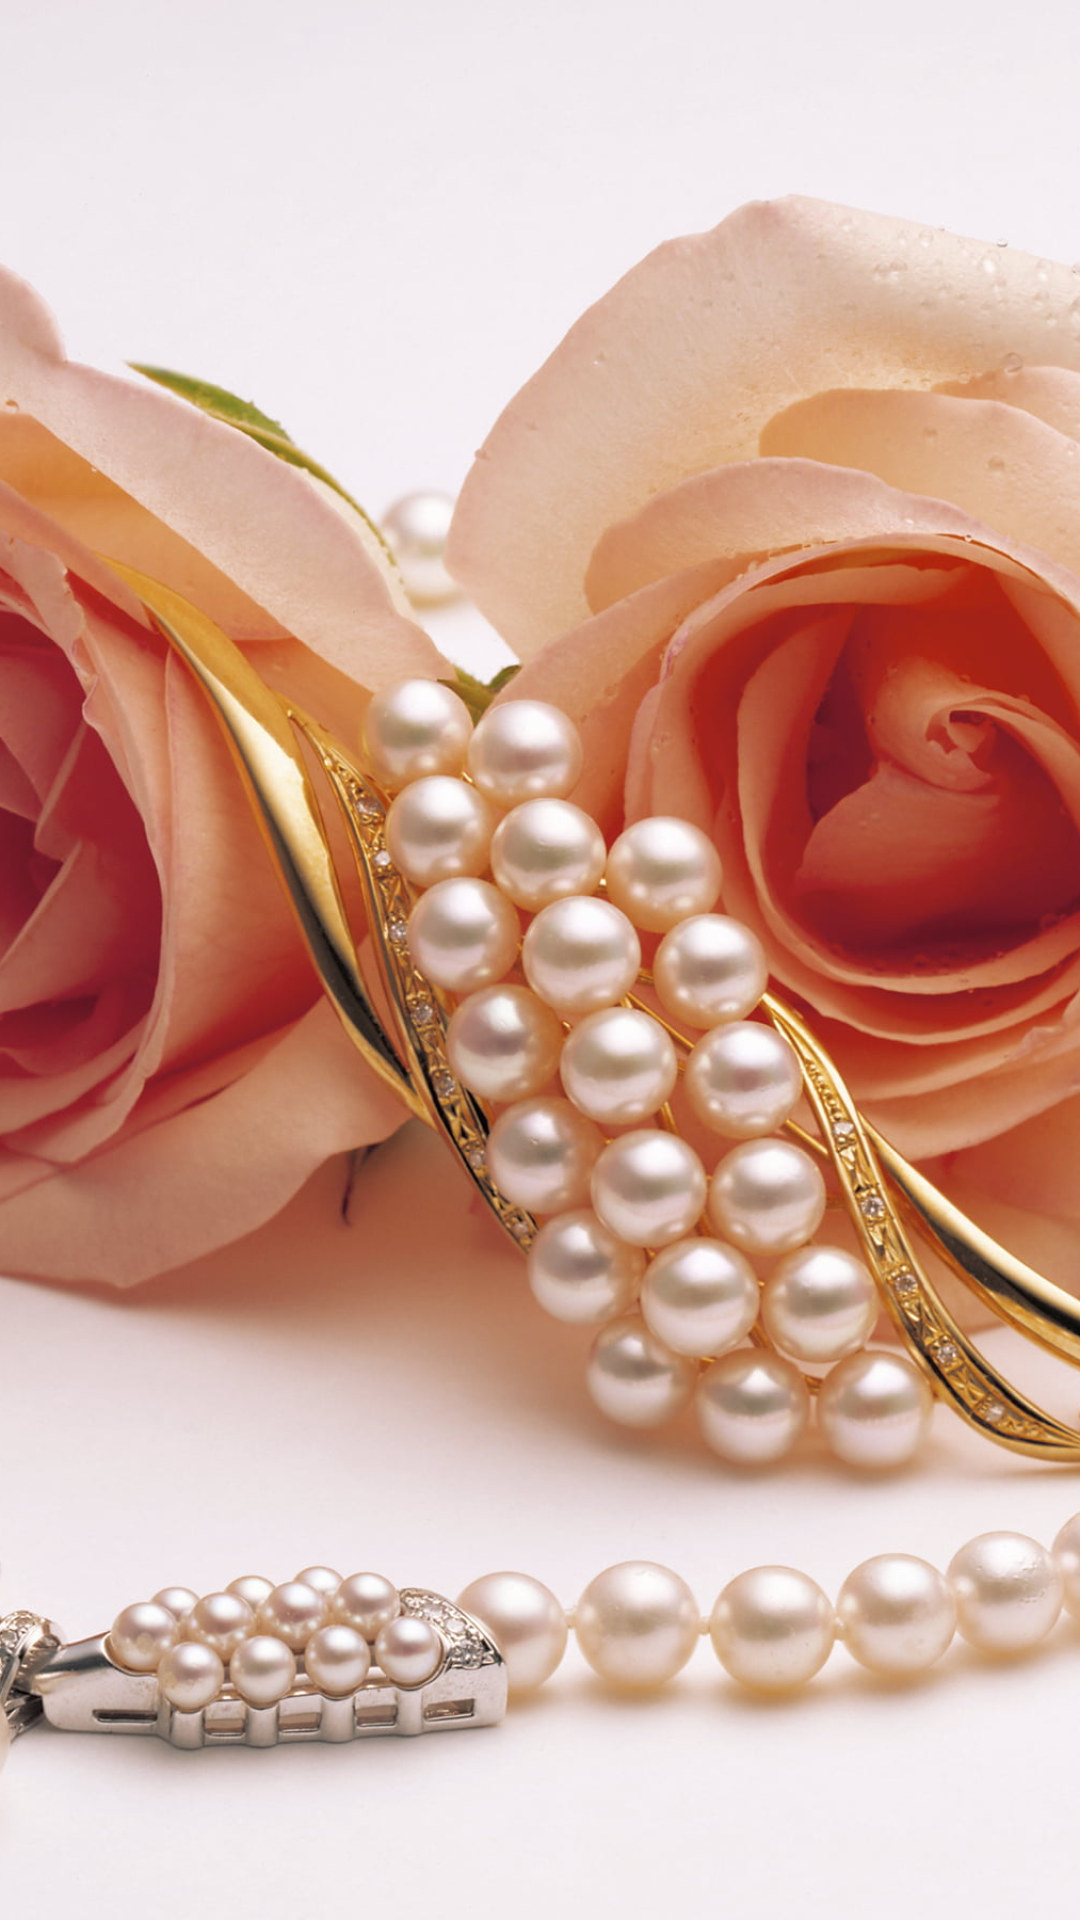 Gold colored jewelry, Pink rose pearls, Fashionable wallpaper, Elegant and chic, 1080x1920 Full HD Handy